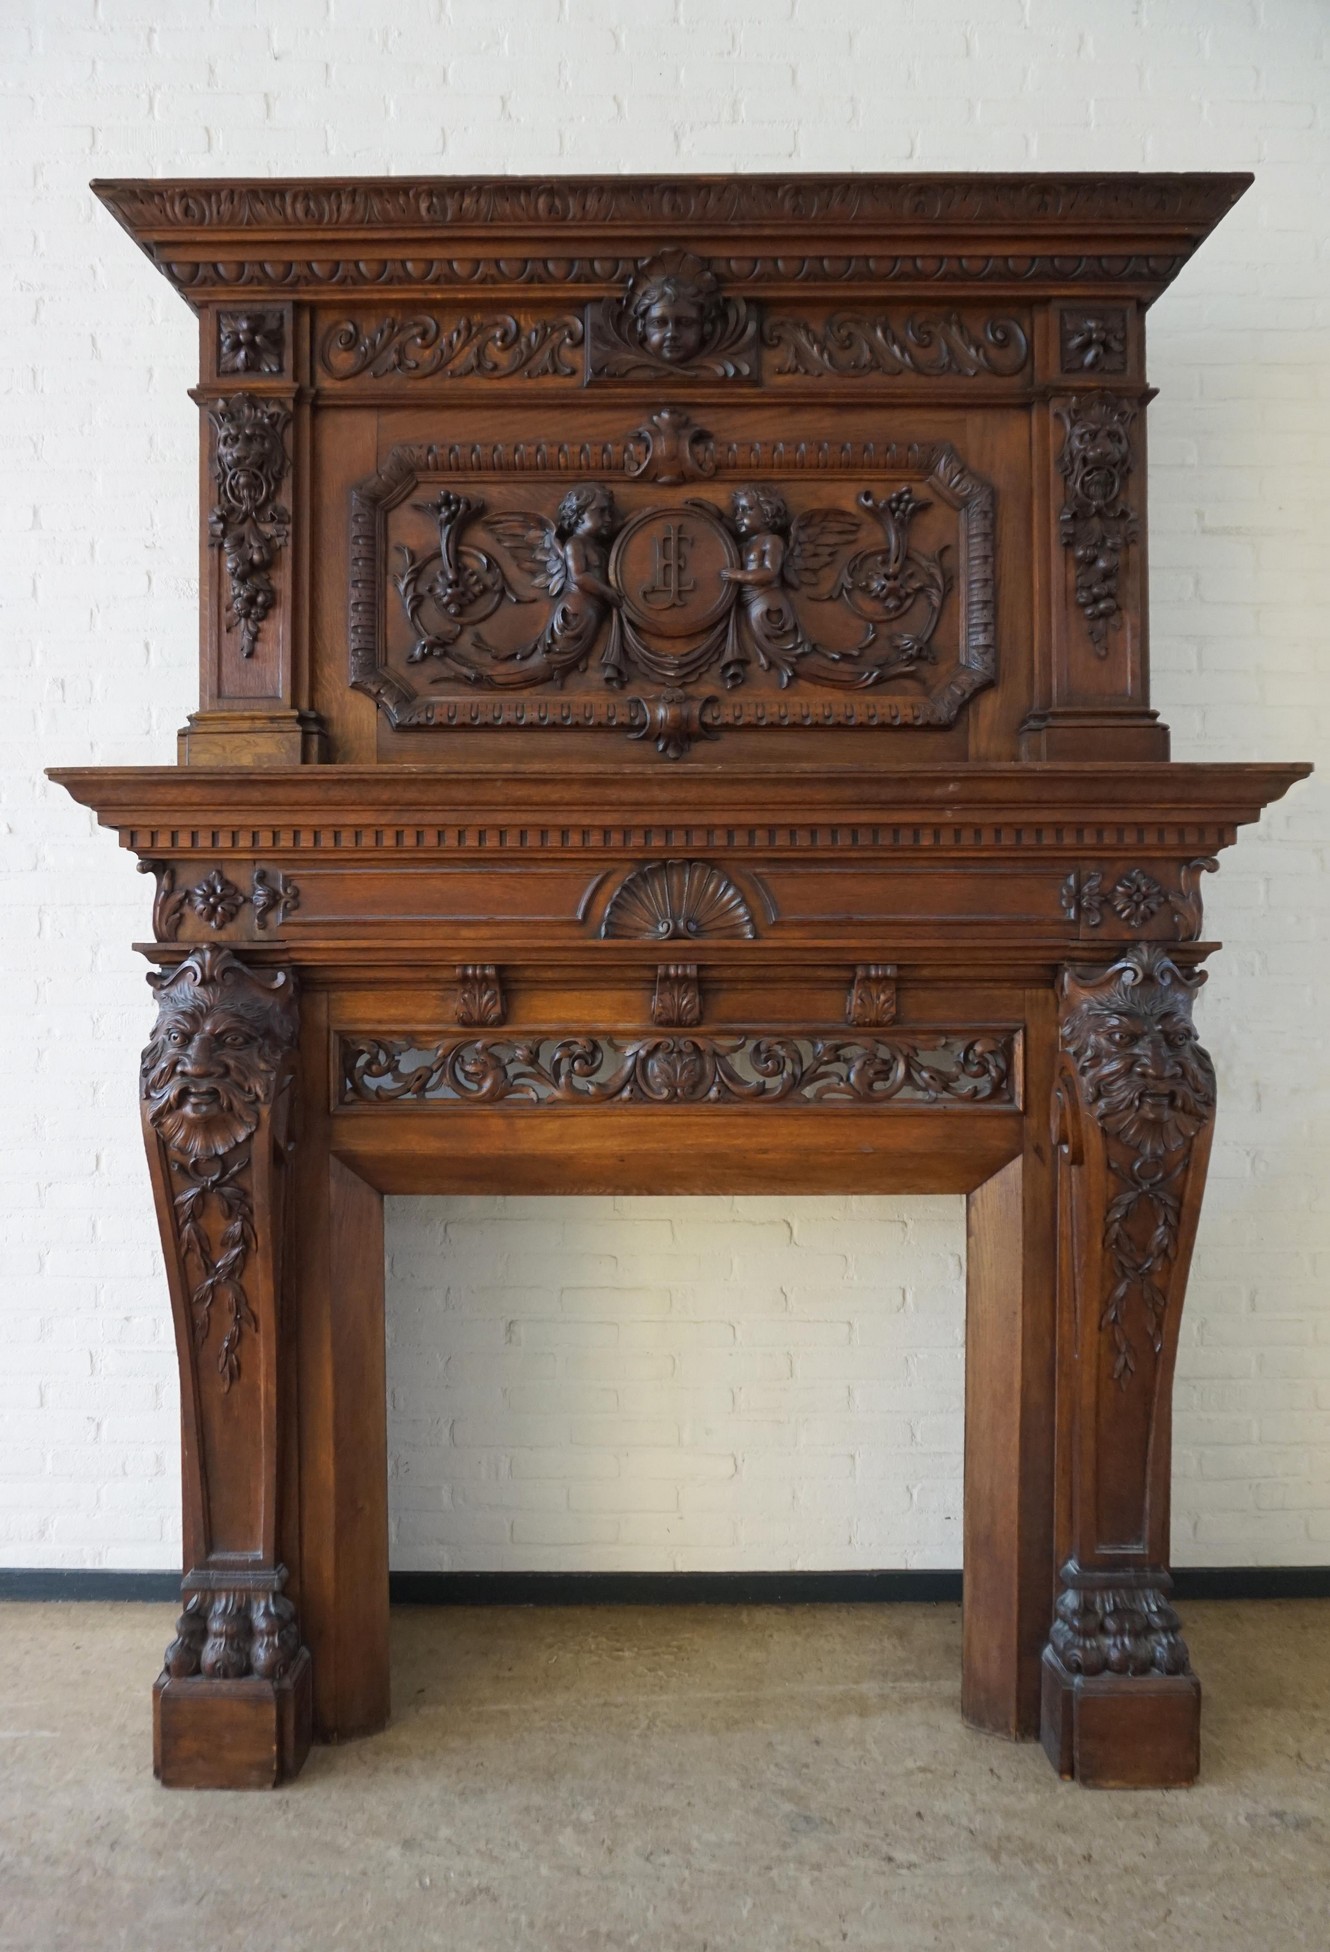 zo Cirkel Beroemdheid Exeptional 19th Century Chateau Fireplace & Overmantel in Solid Carved Oak